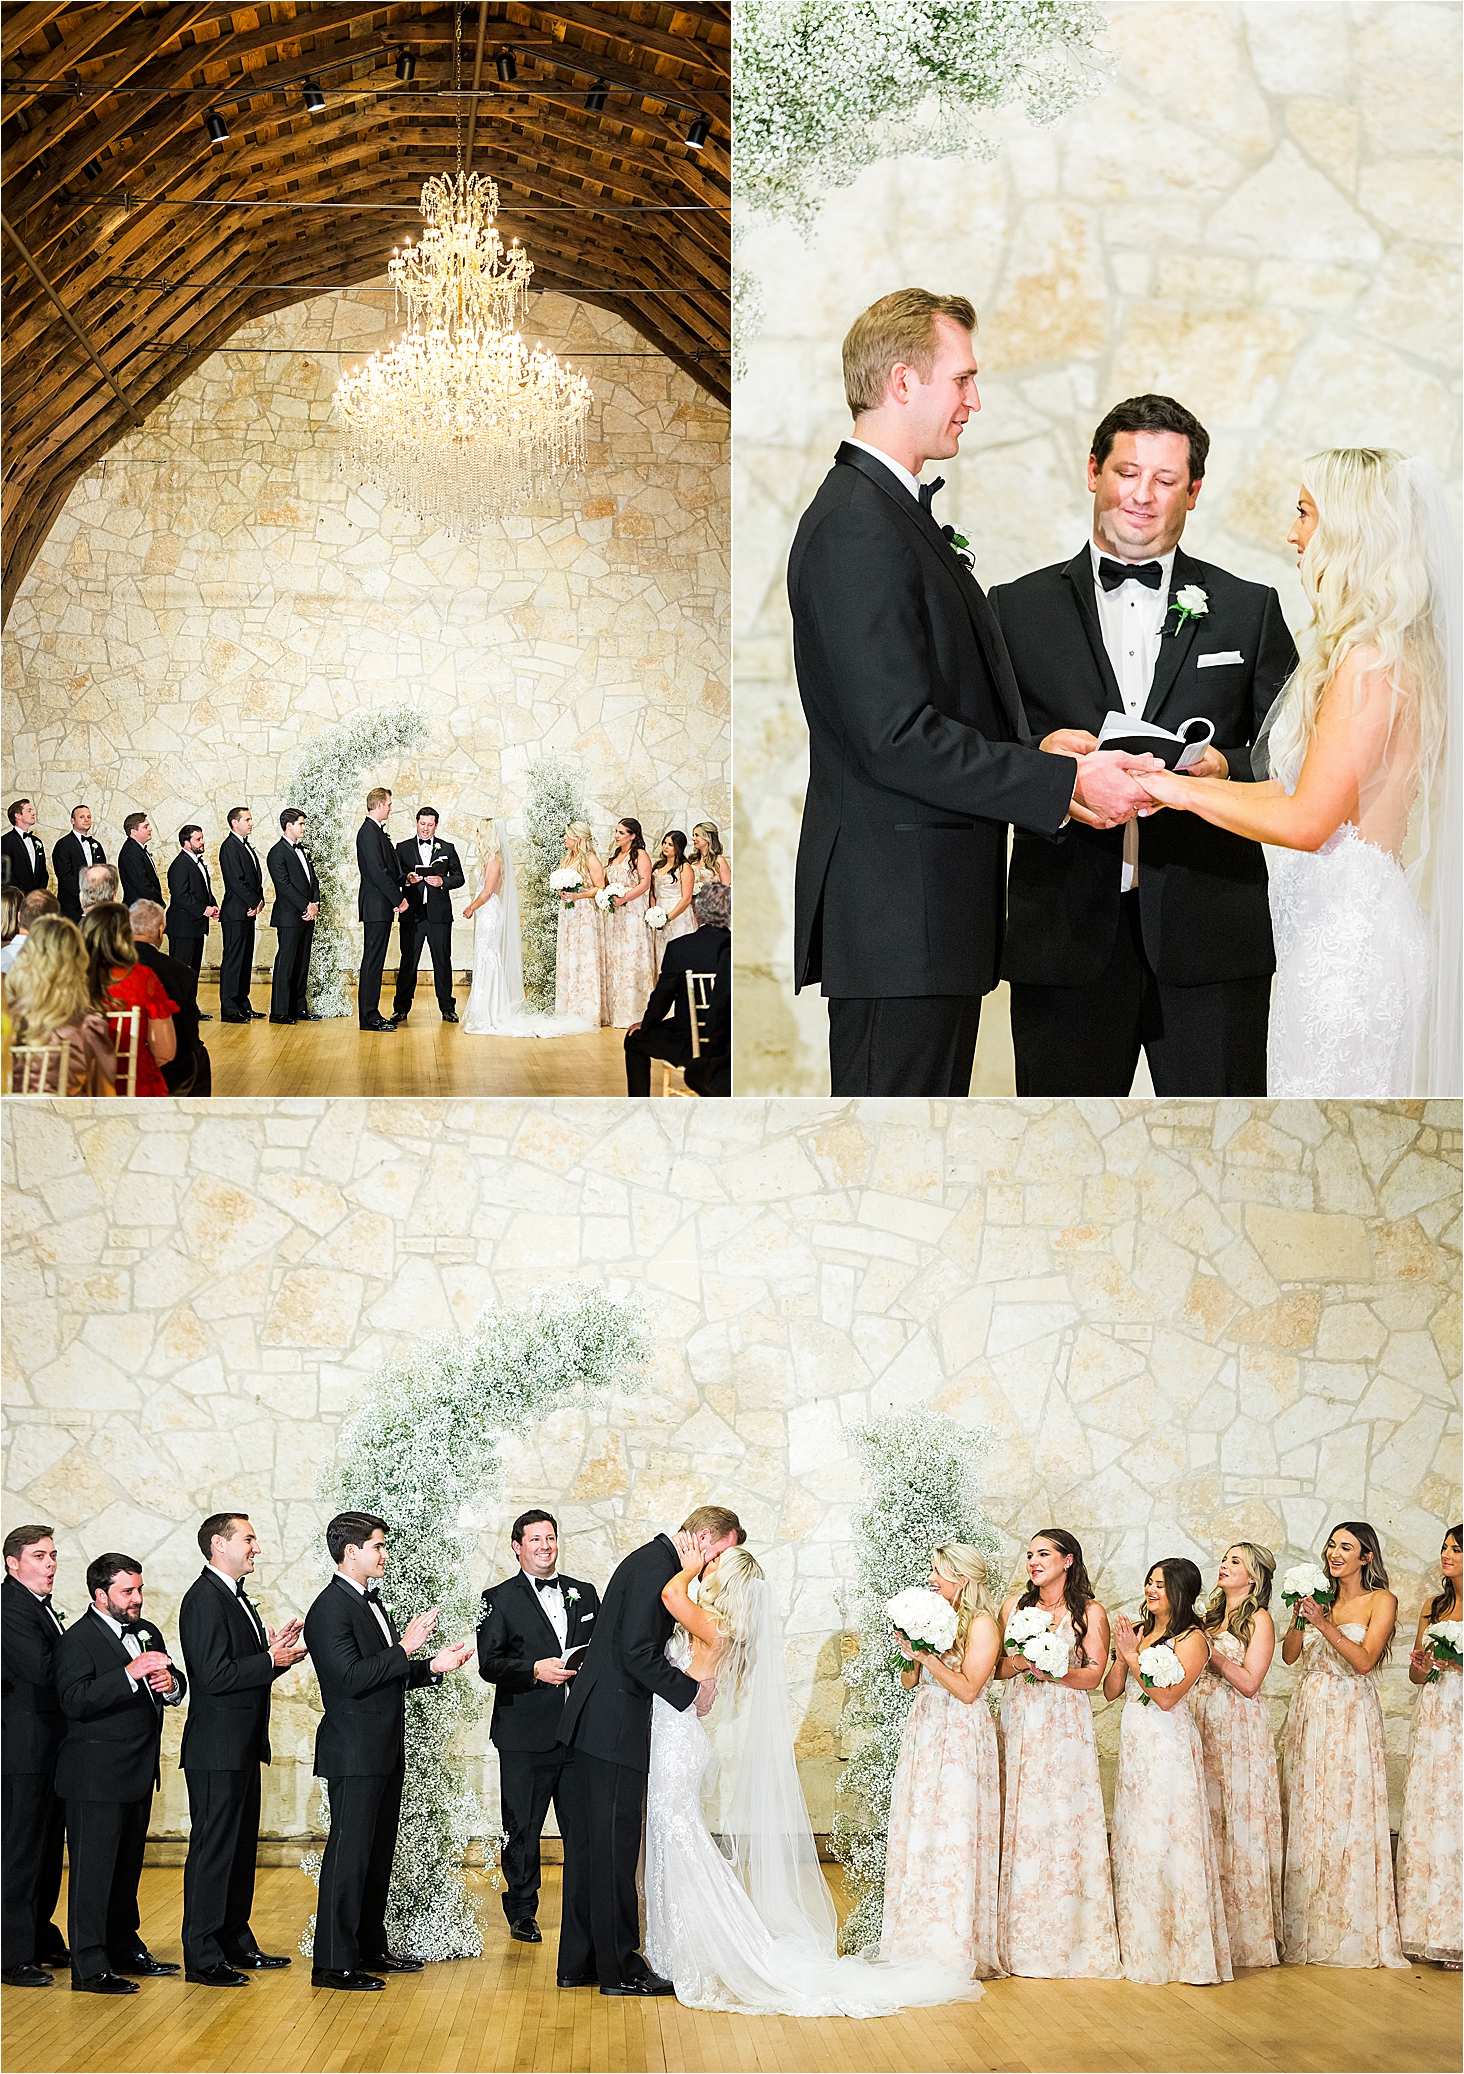 A bride and groom share their first kiss as husband and wife in front of a stone wall and chandeliers above them at Brodie Homestead in Austin, Texas. 